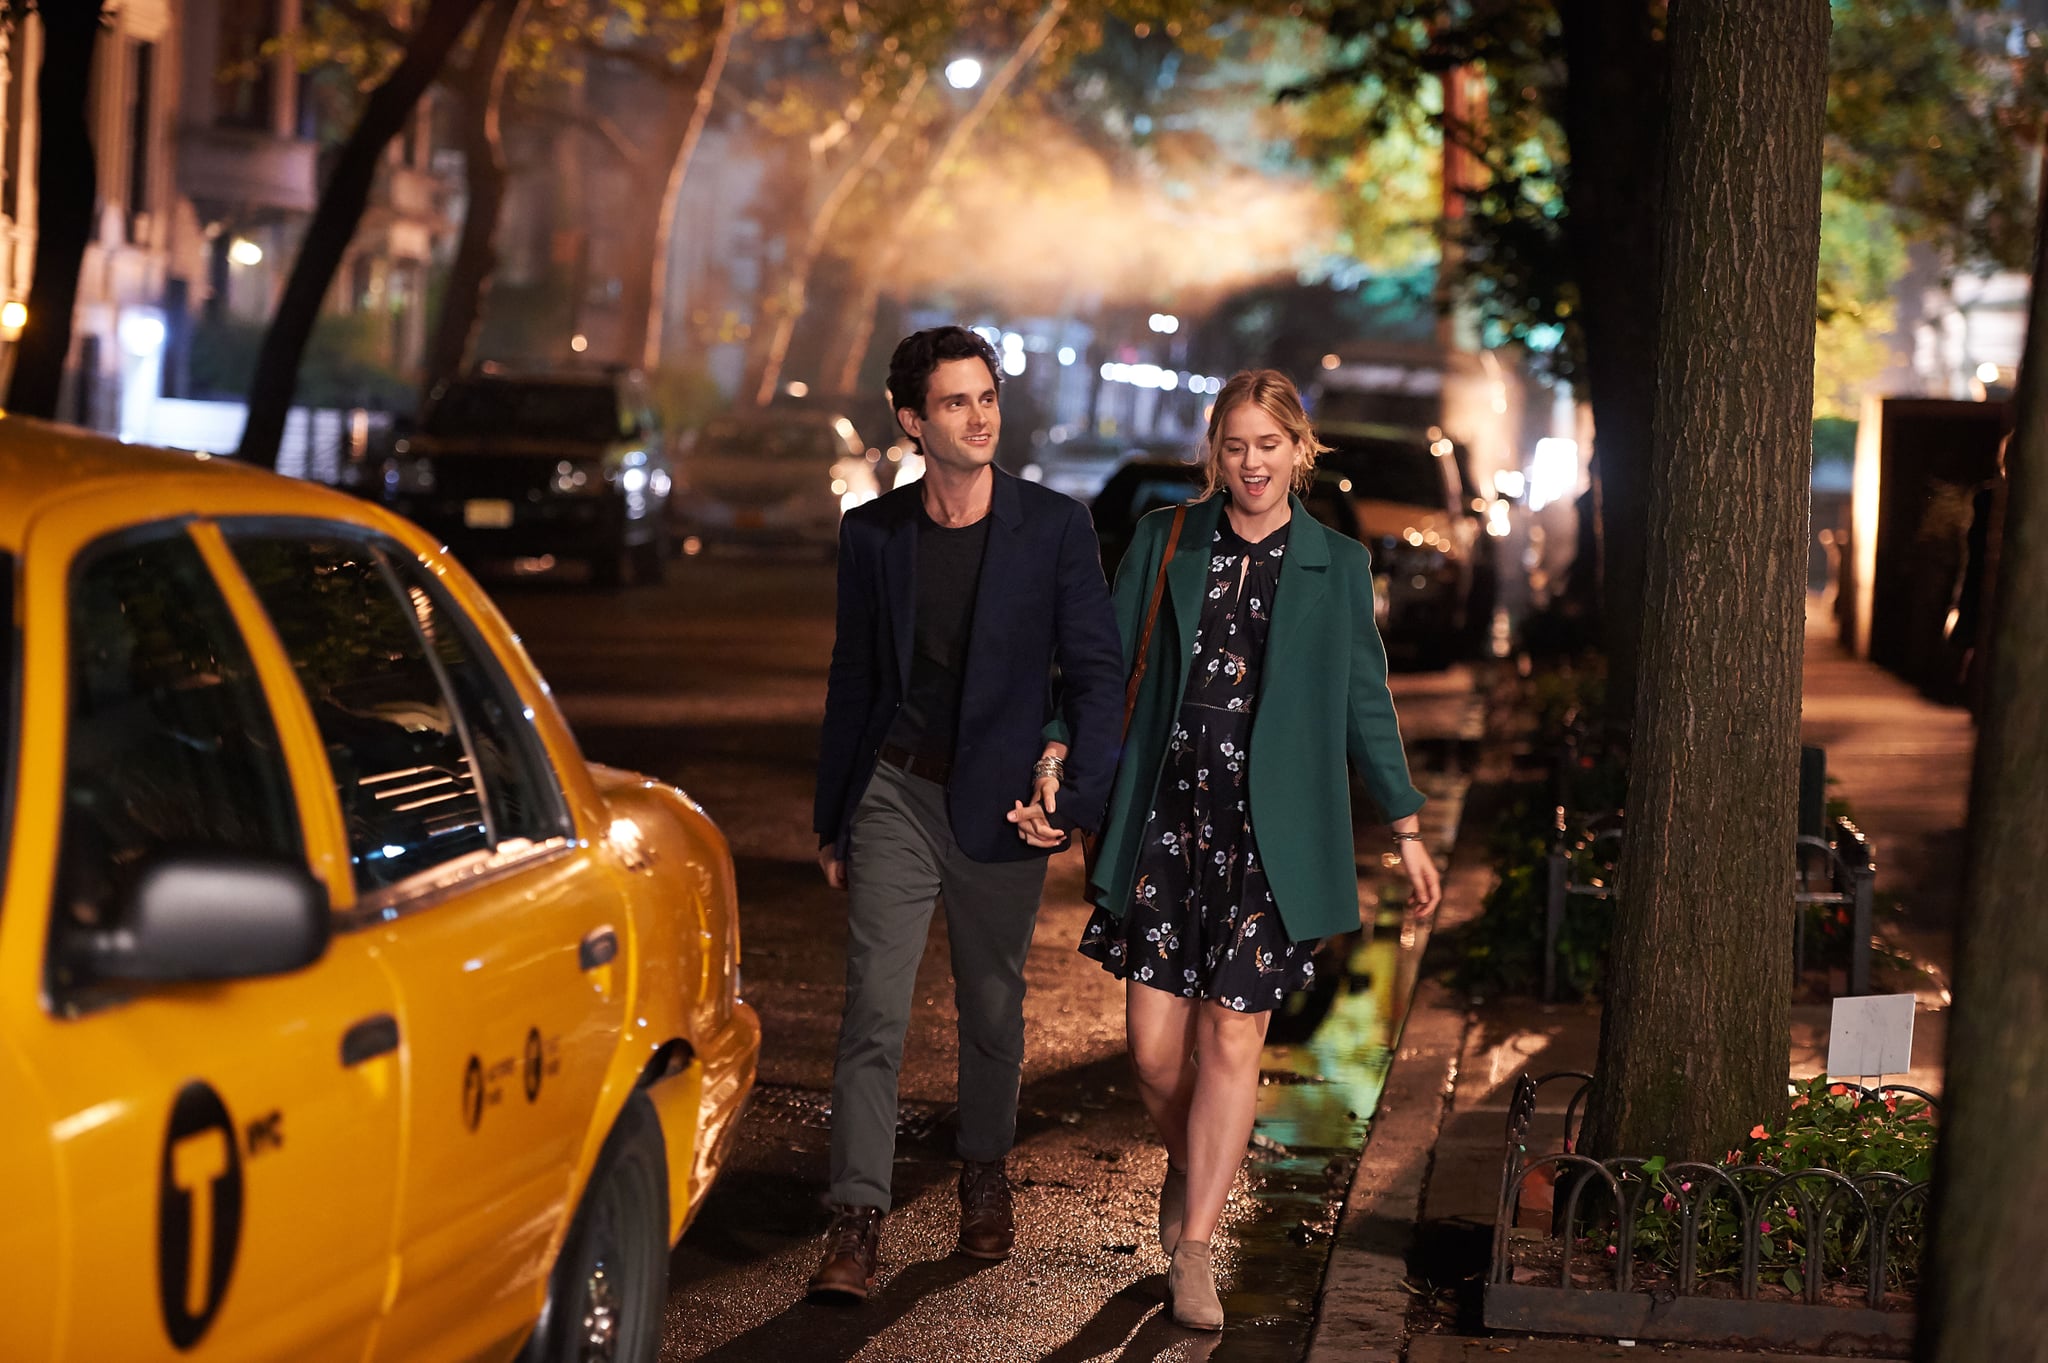 YOU, from left: Penn Badgely, Elizabeth Lail in 'The Last Nice Guy in New York', (Season 1, Episode 102, aired September 16, 2018).  Lifetime / courtesy Everett Collection